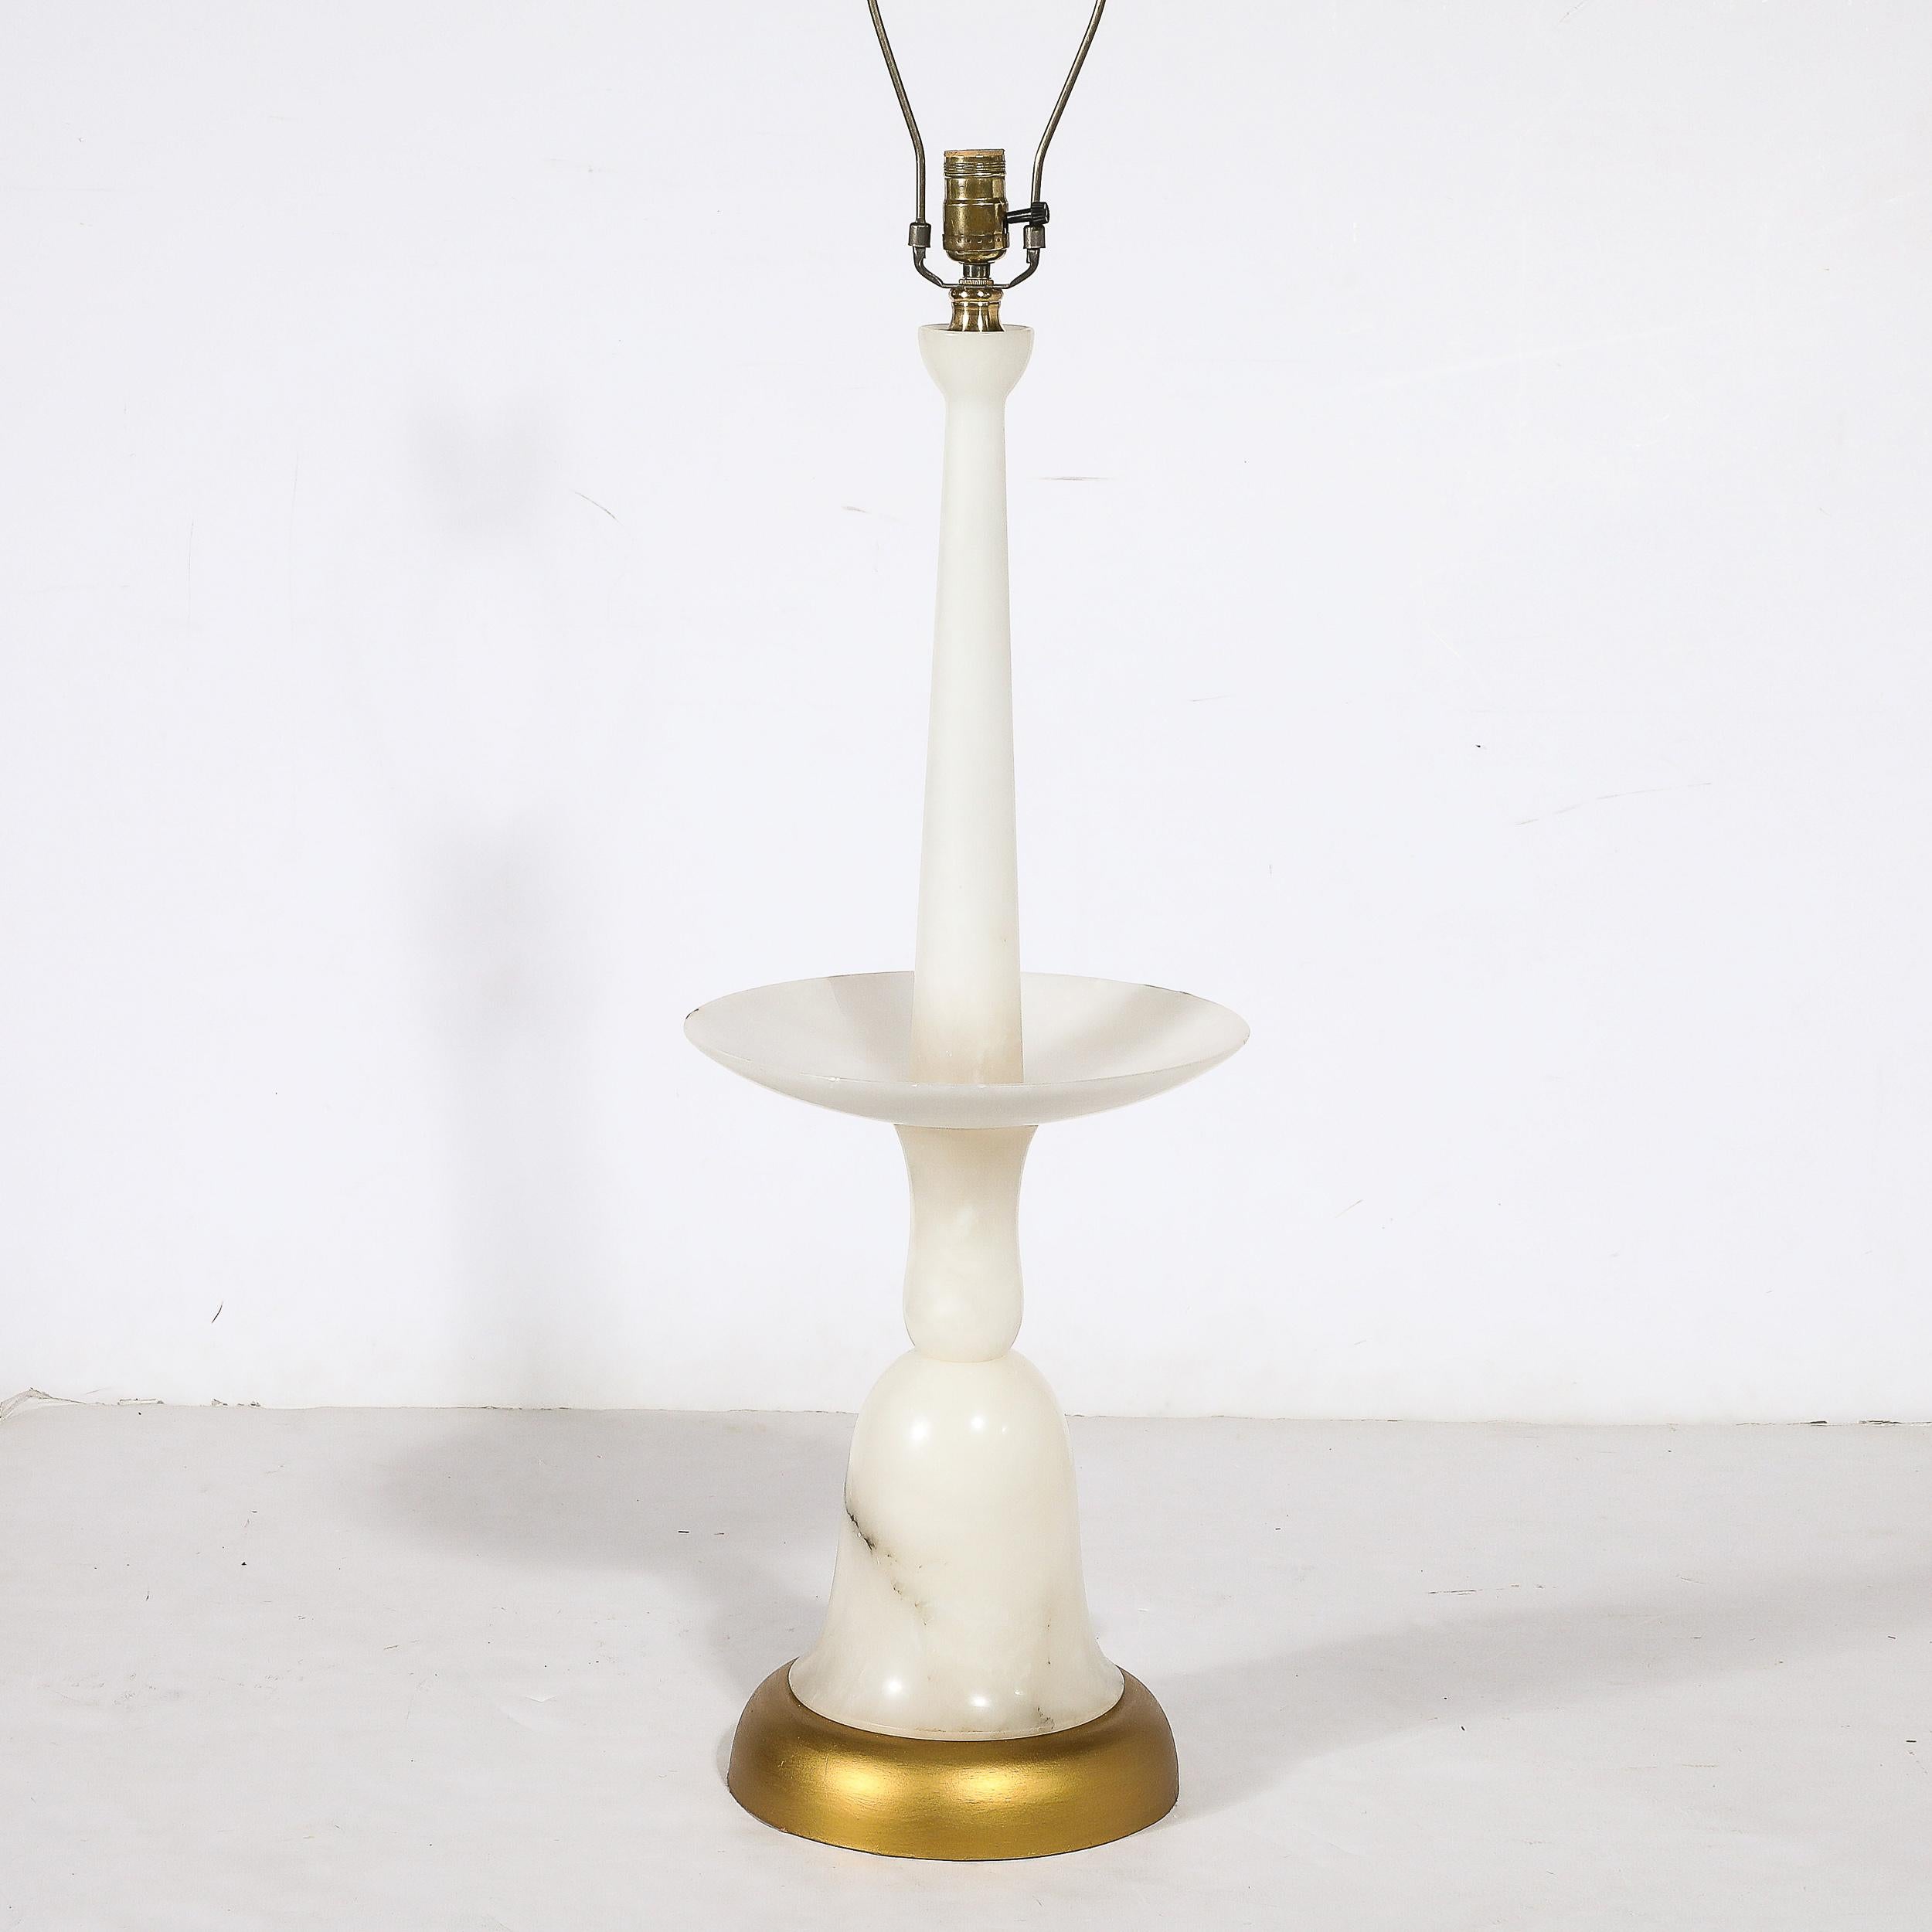 Italian Mid-Century Modernist Sculptural Balustrade Form Table Lamp in Carrera Marble For Sale